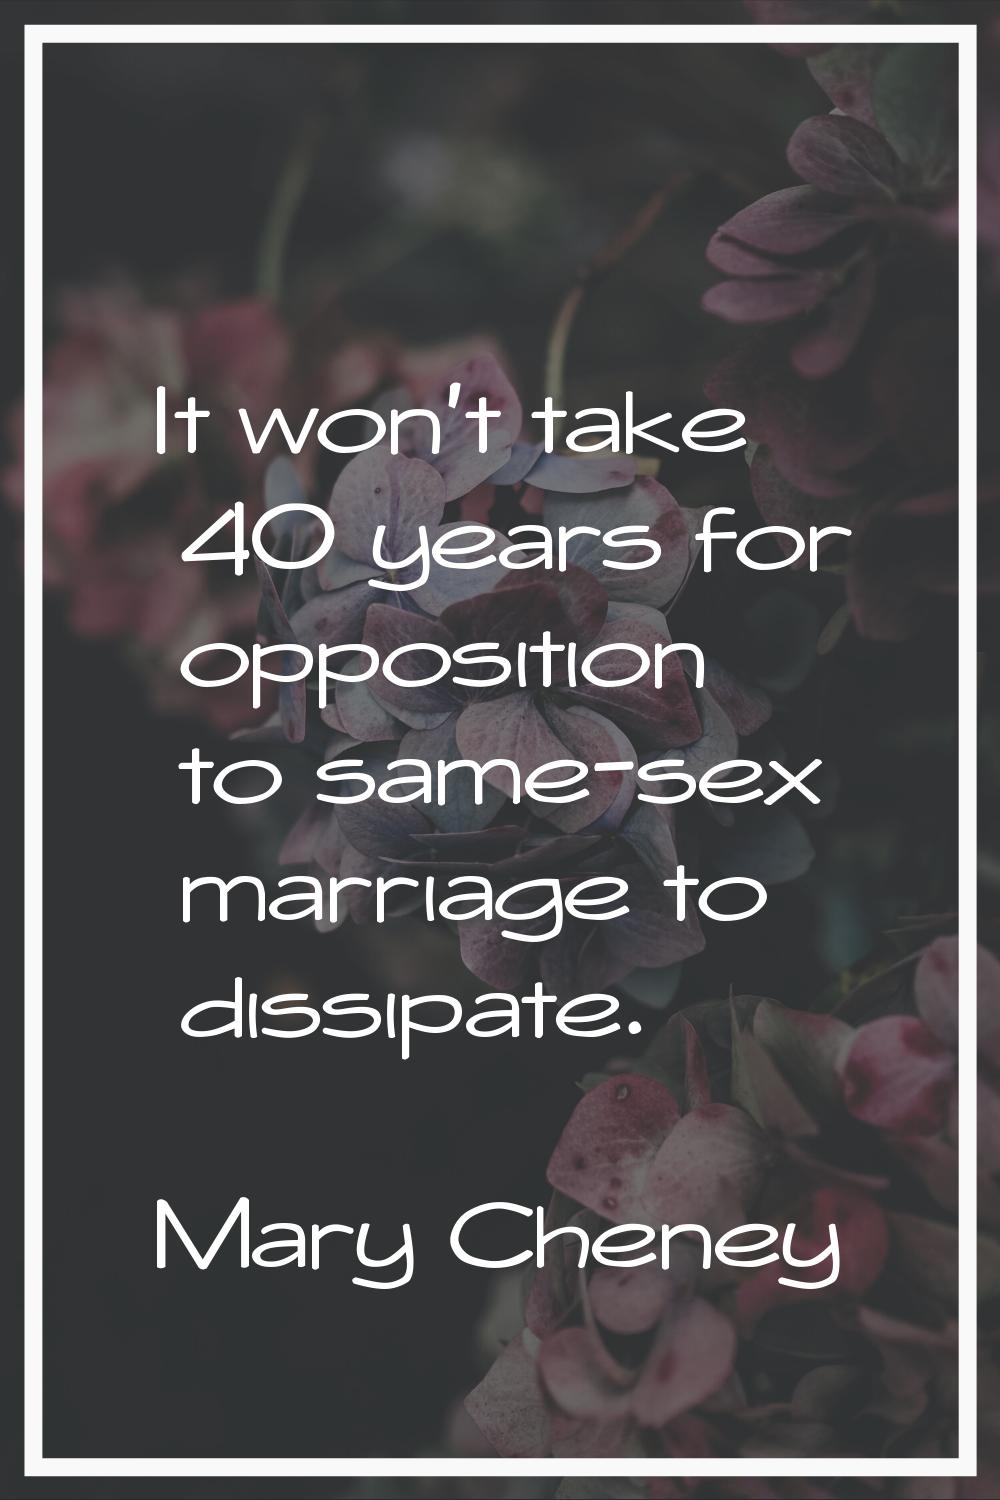 It won't take 40 years for opposition to same-sex marriage to dissipate.